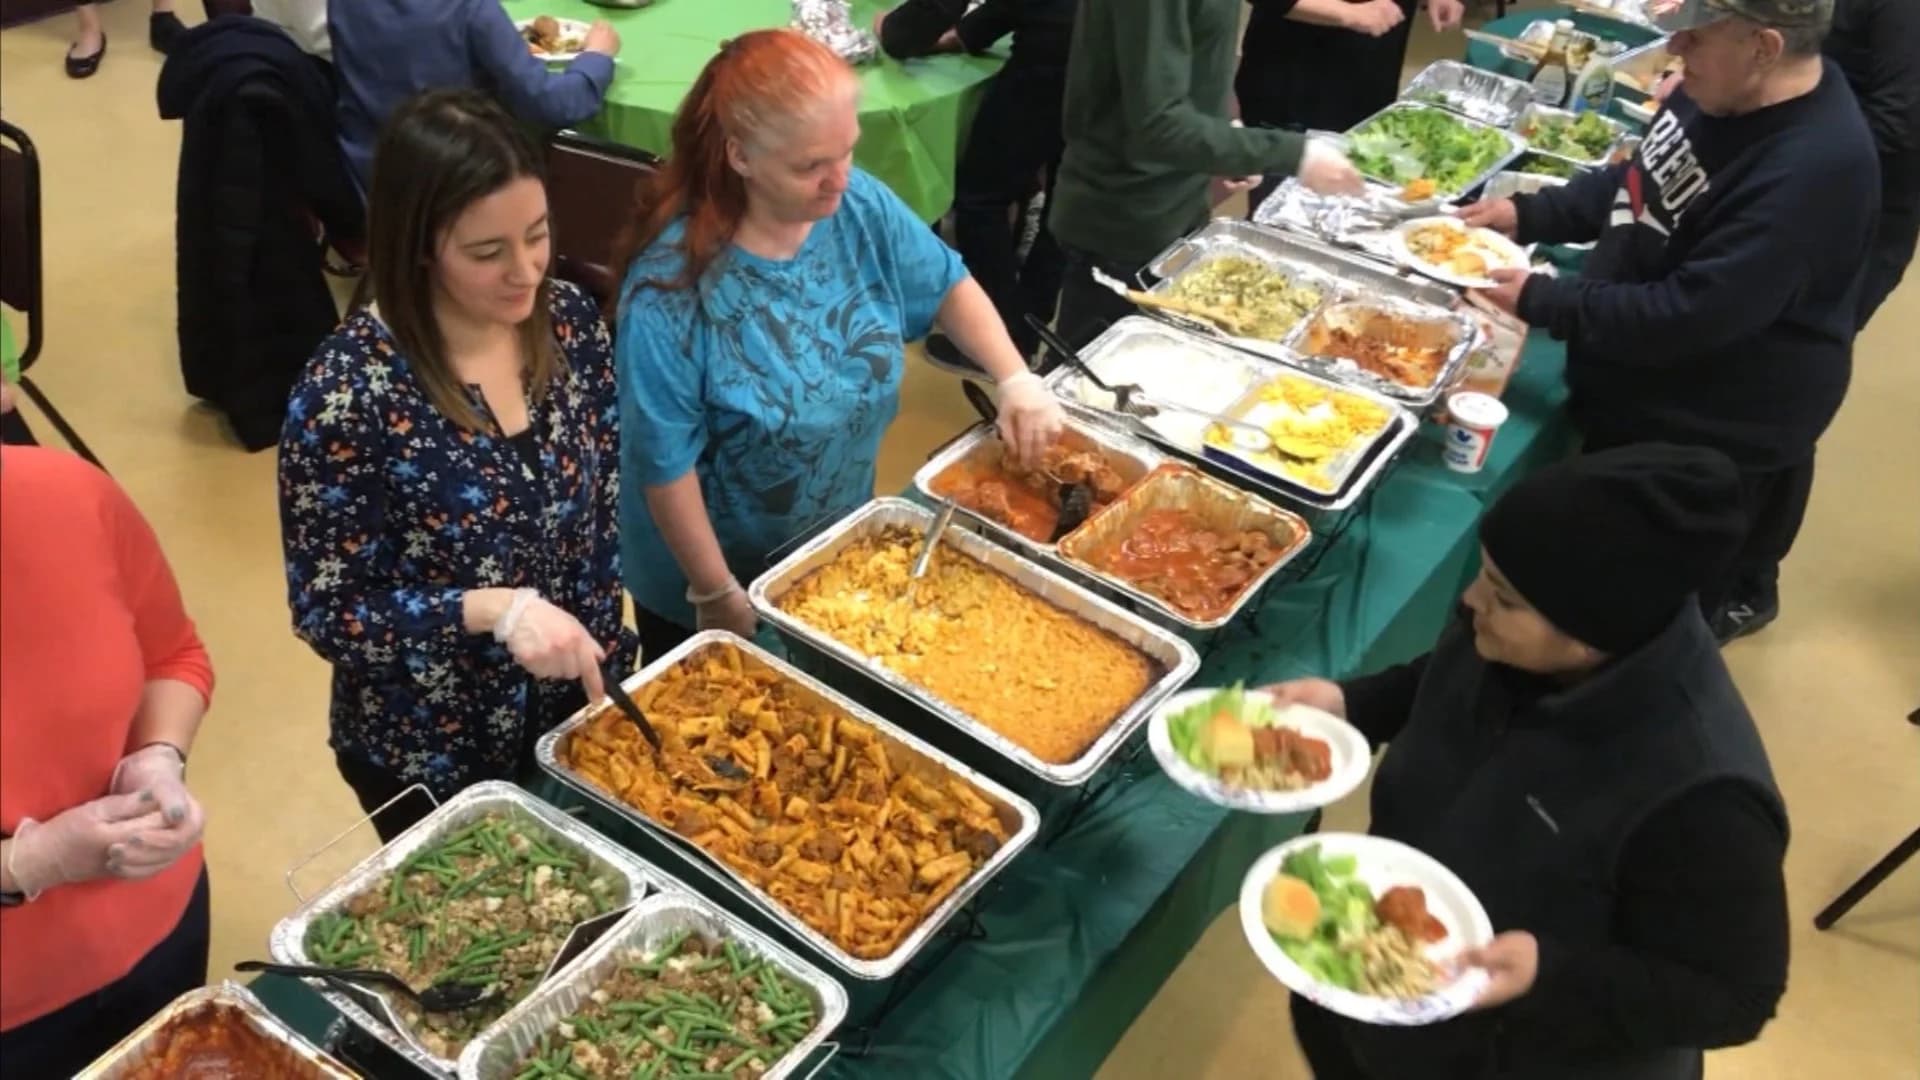 Getting to know you: Community holds monthly dinners to meet neighbors